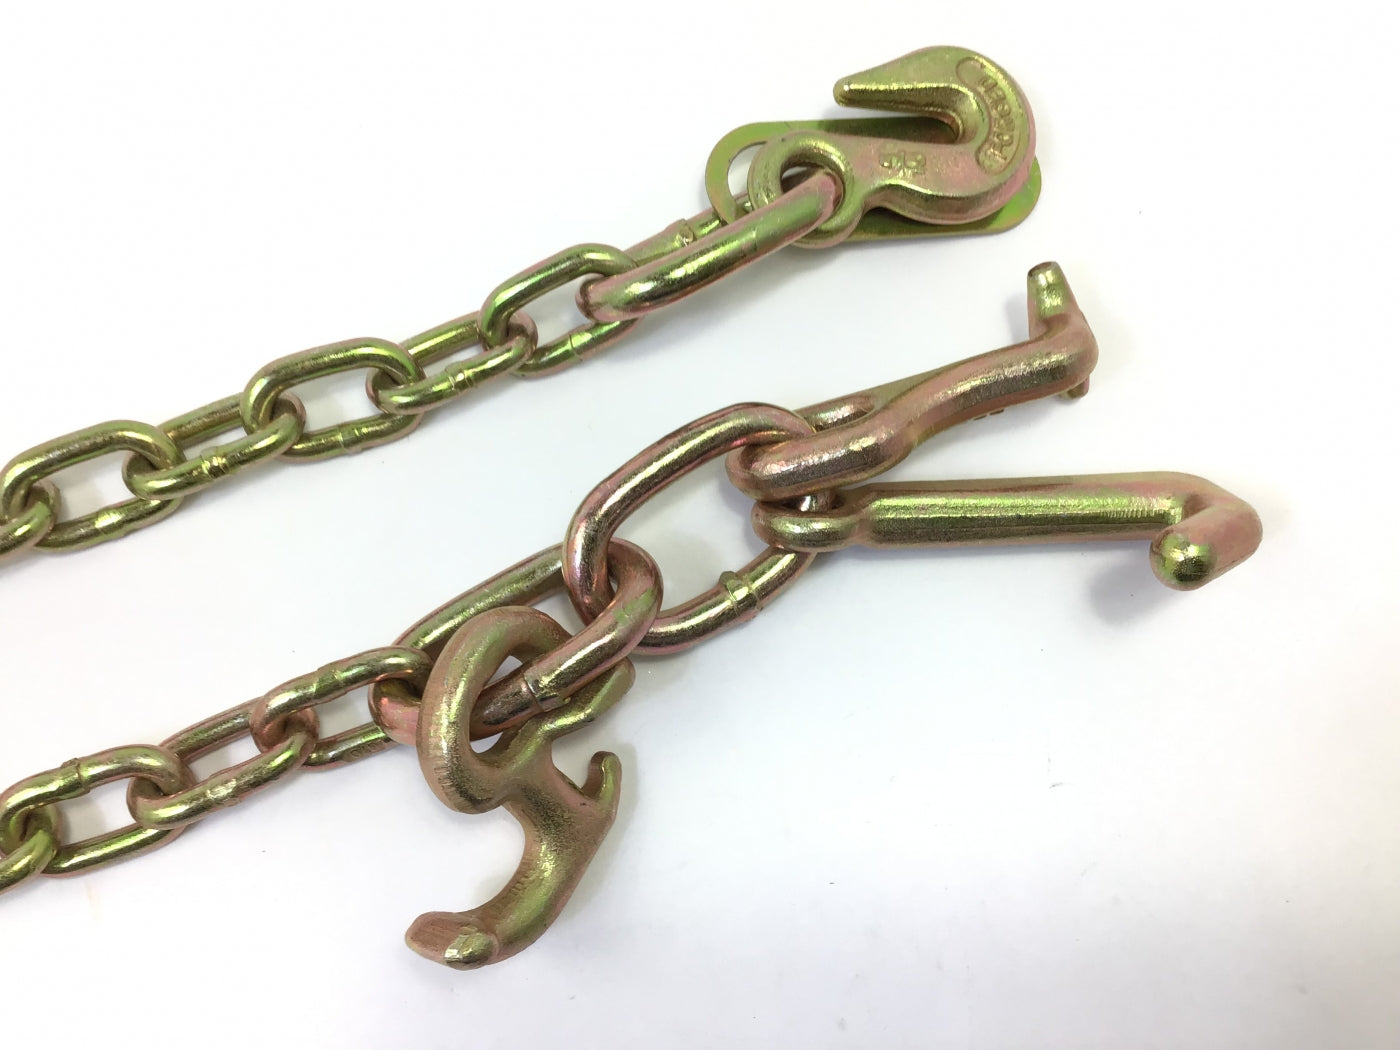 5/16" x 10' G70 Auto Transport FLATBED Chain with RTJ Cluster Hooks+Grab